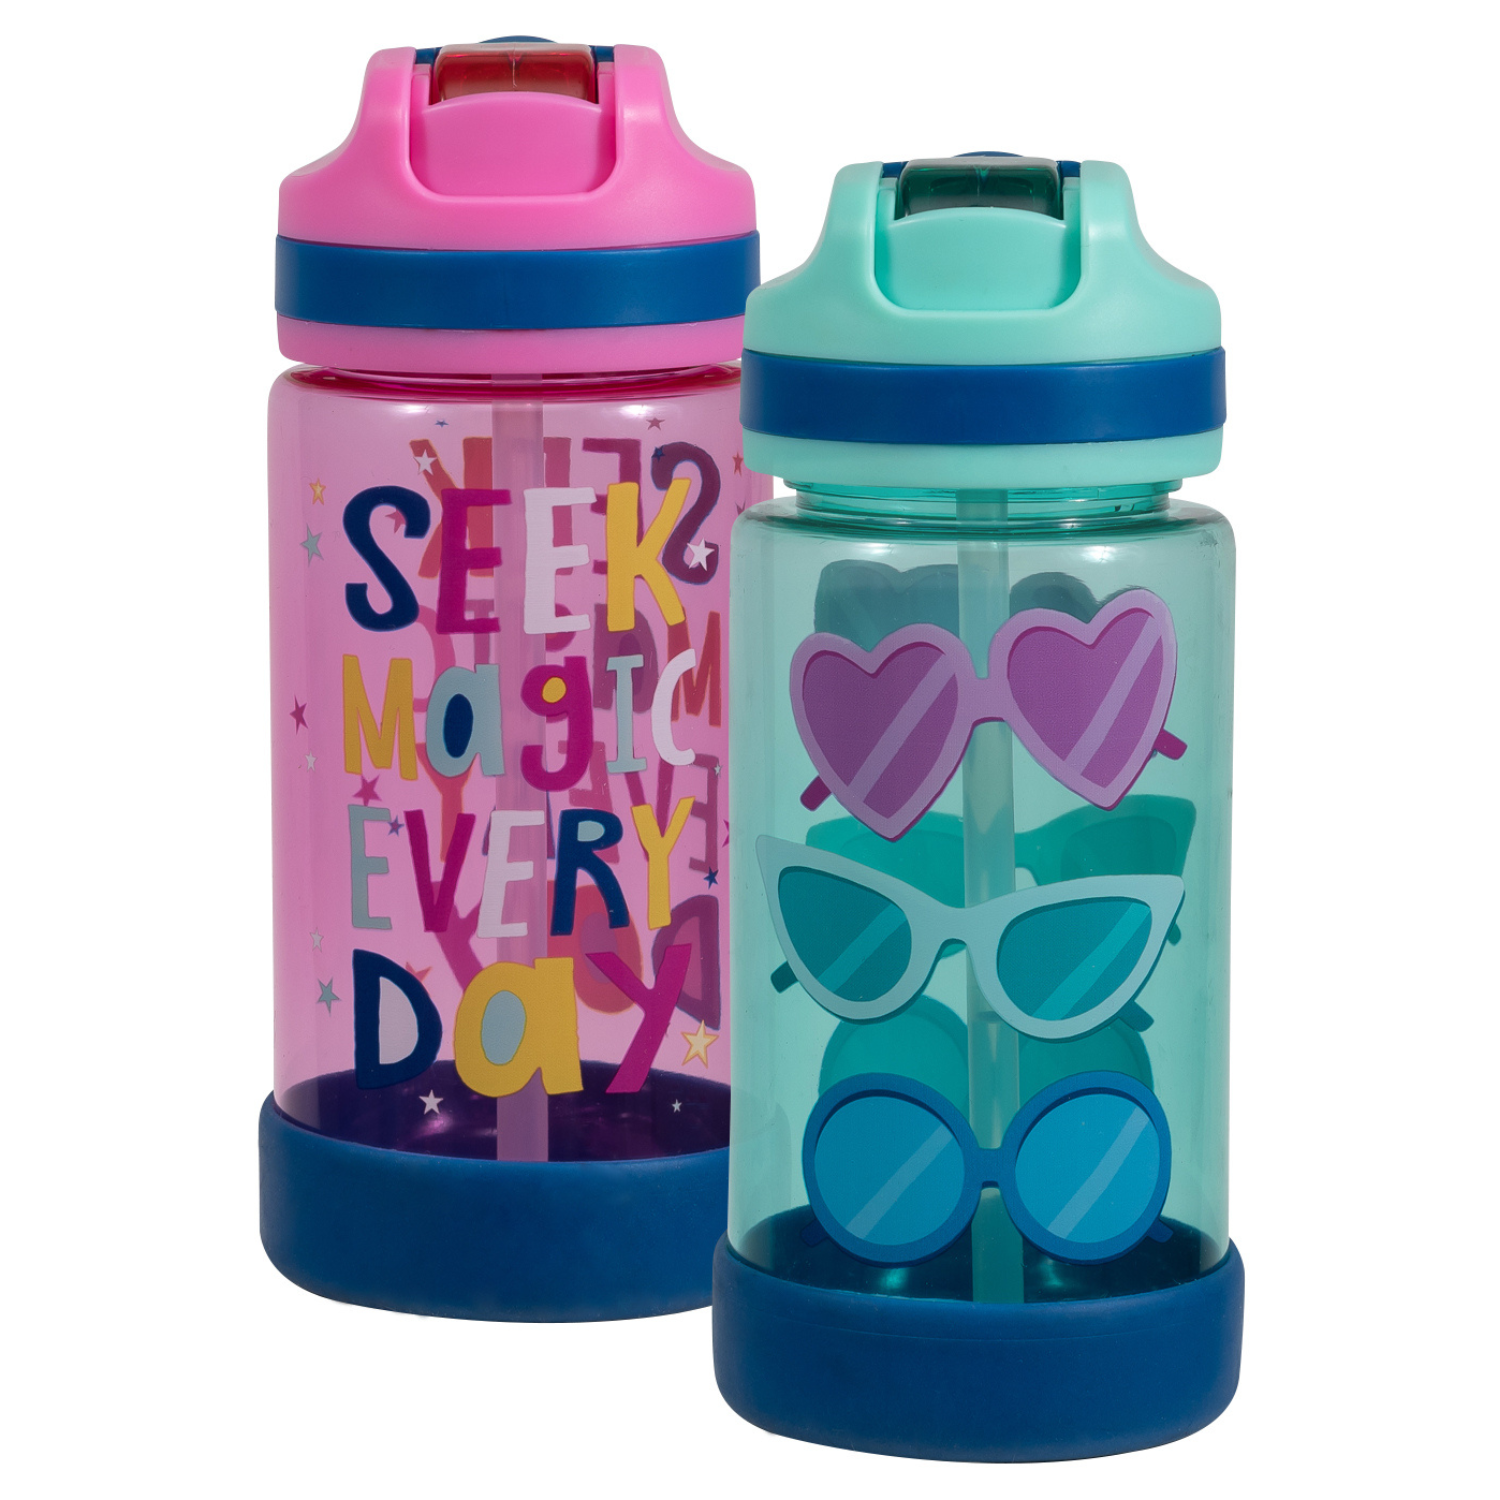  COOL GEAR 2-Pack 16 oz Pop Lights Water Bottles  Light Up &  Designed Travel Cup for Kids, Outdoors, Gifts - Sunglasses/Seek Magic :  Sports & Outdoors